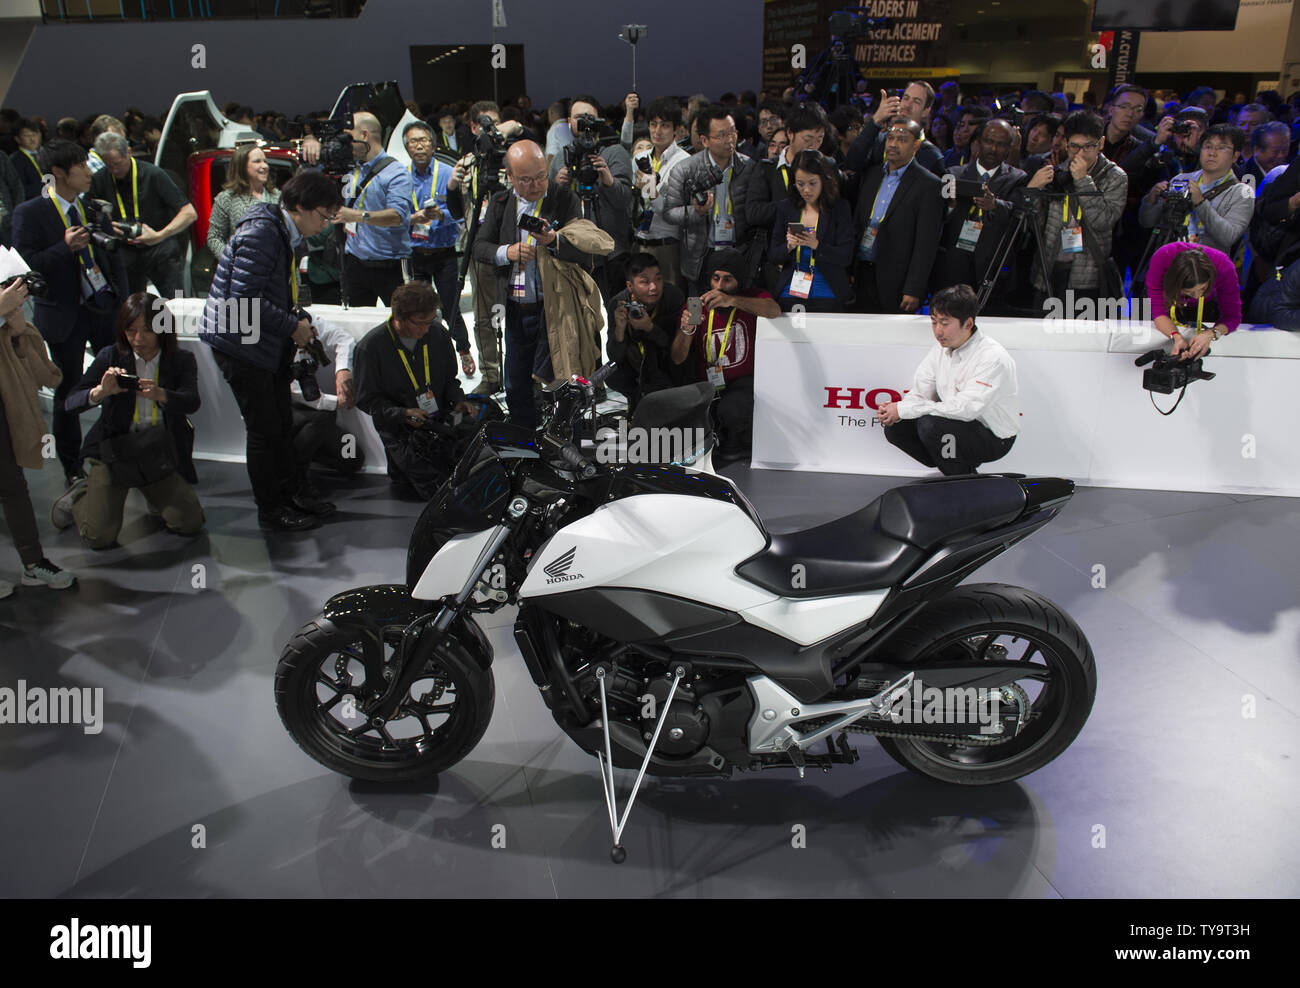 The Honda Riding Assist Motorcycle and the Honda Uni-Cub, a personal  transportation device, are introduces at the 2017 International CES, a  trade show of consumer electronics, in Las Vegas, Nevada, January 5,